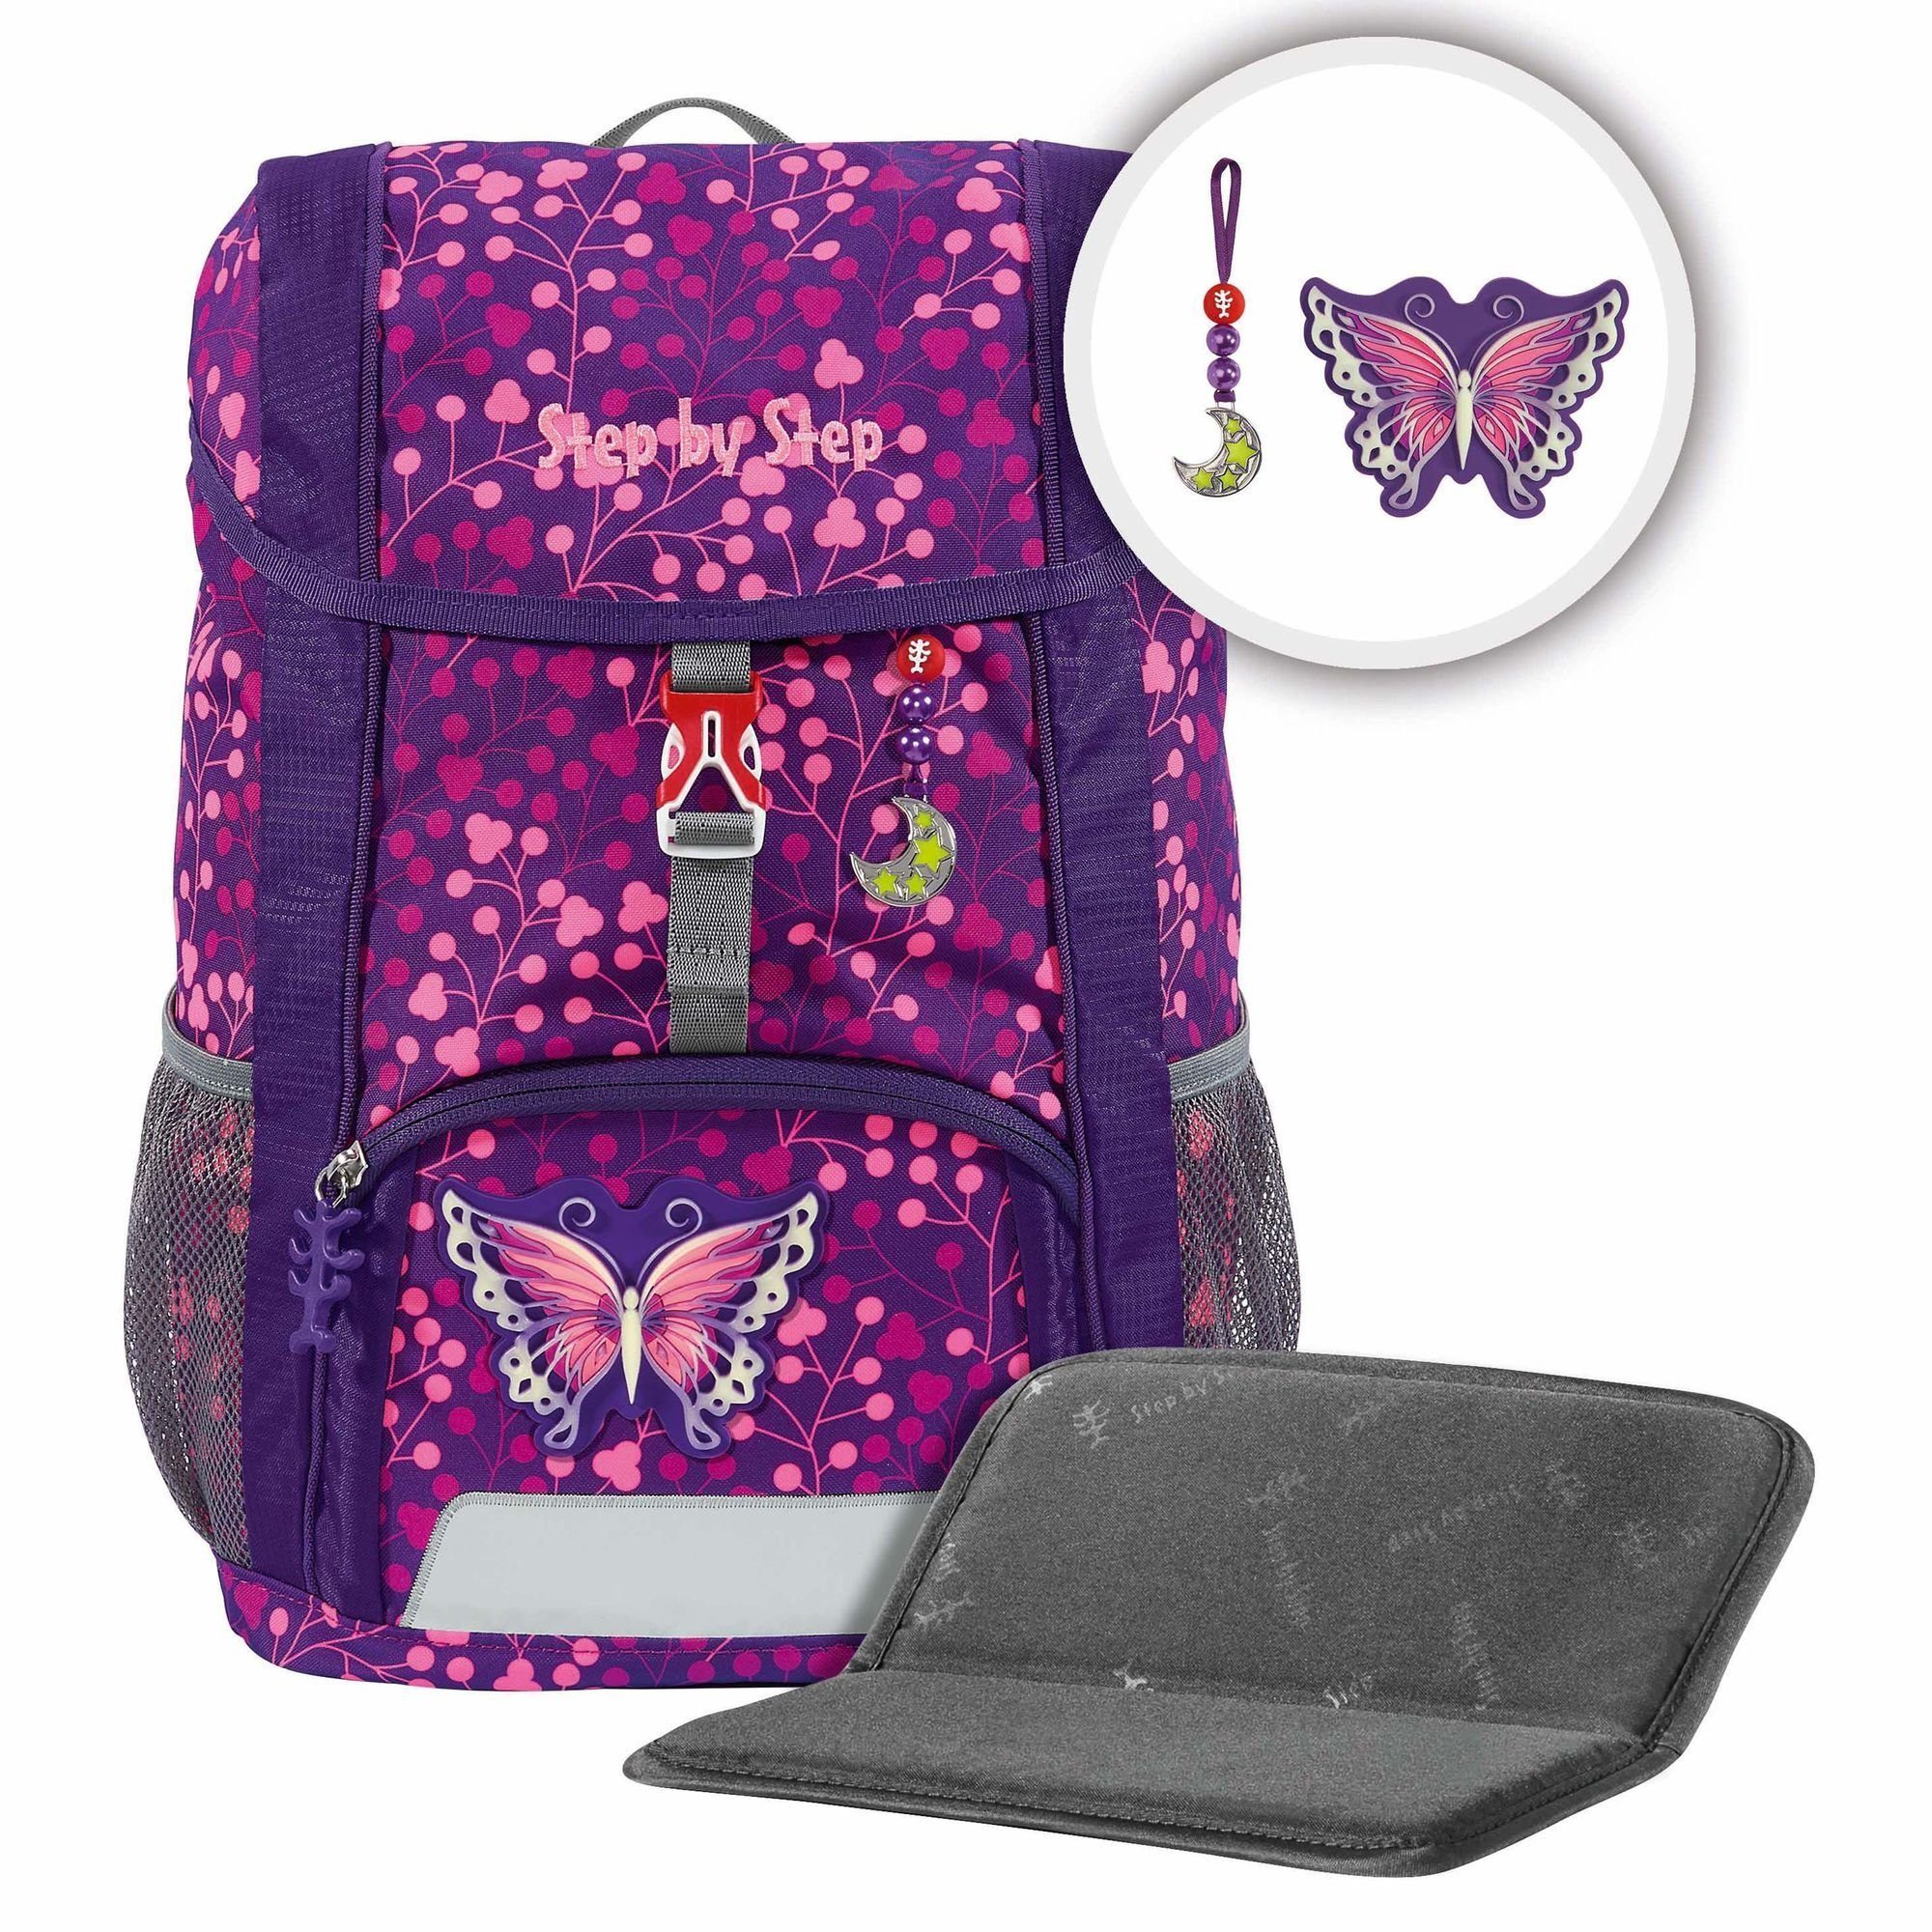 Step by Step Kinderrucksack Kid Shine, Polyester butterfly night ina